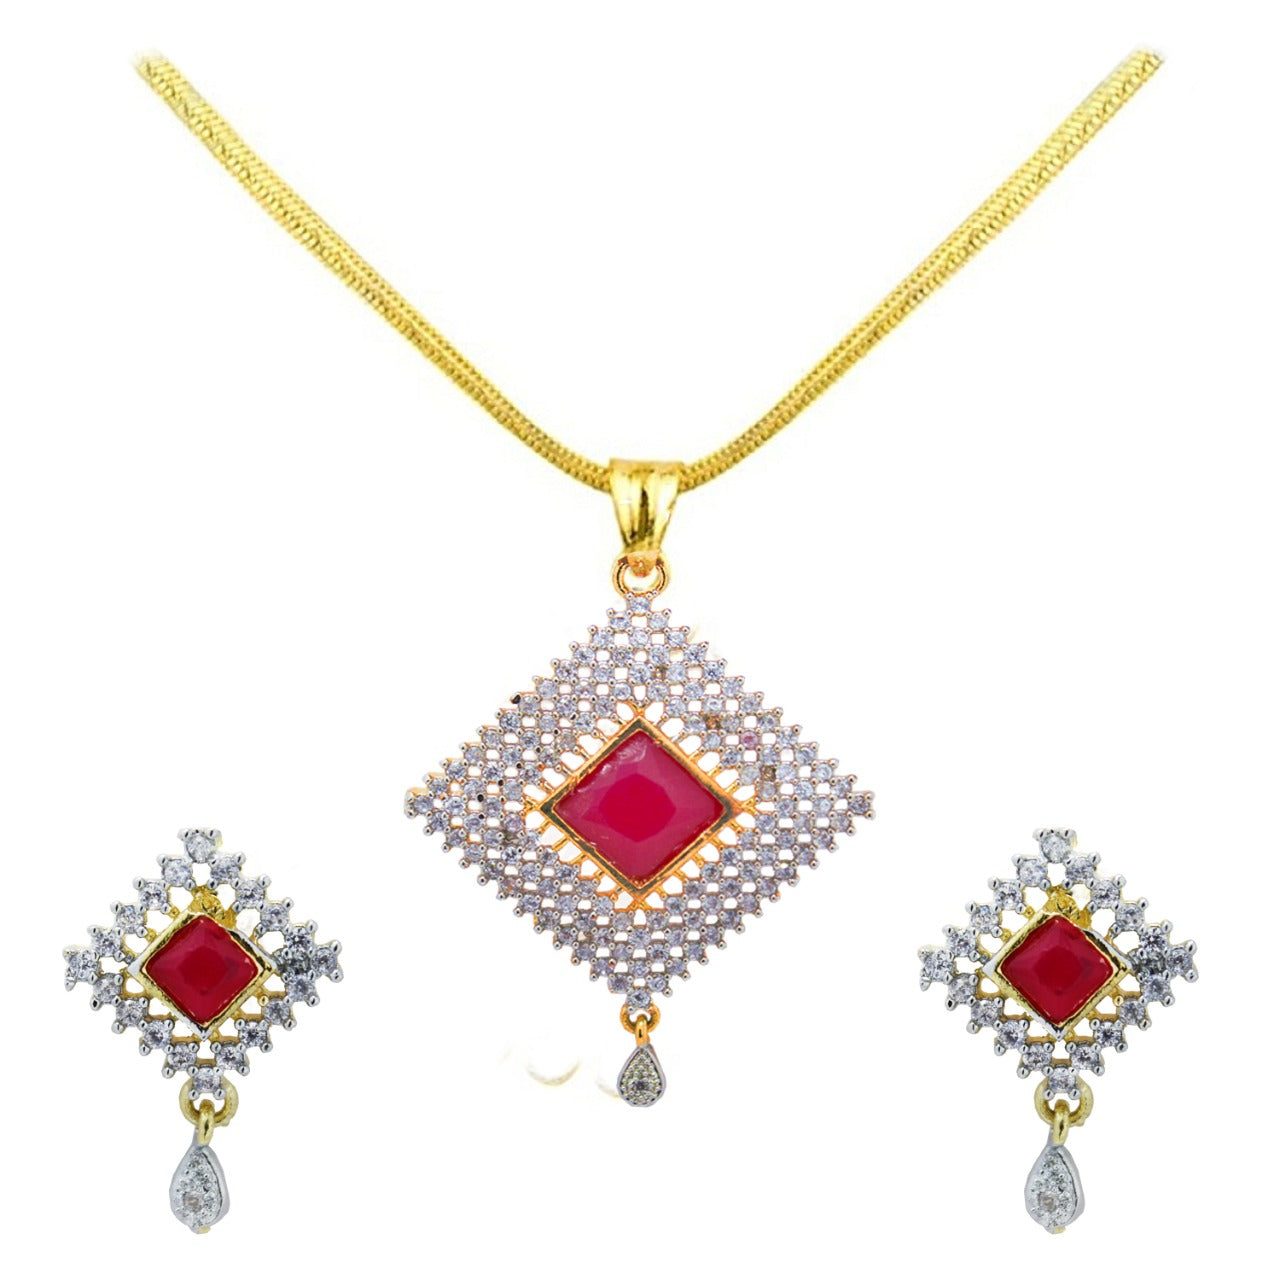 Square Design Red American Stone Studded Necklace Set with Earring For Women and Girls